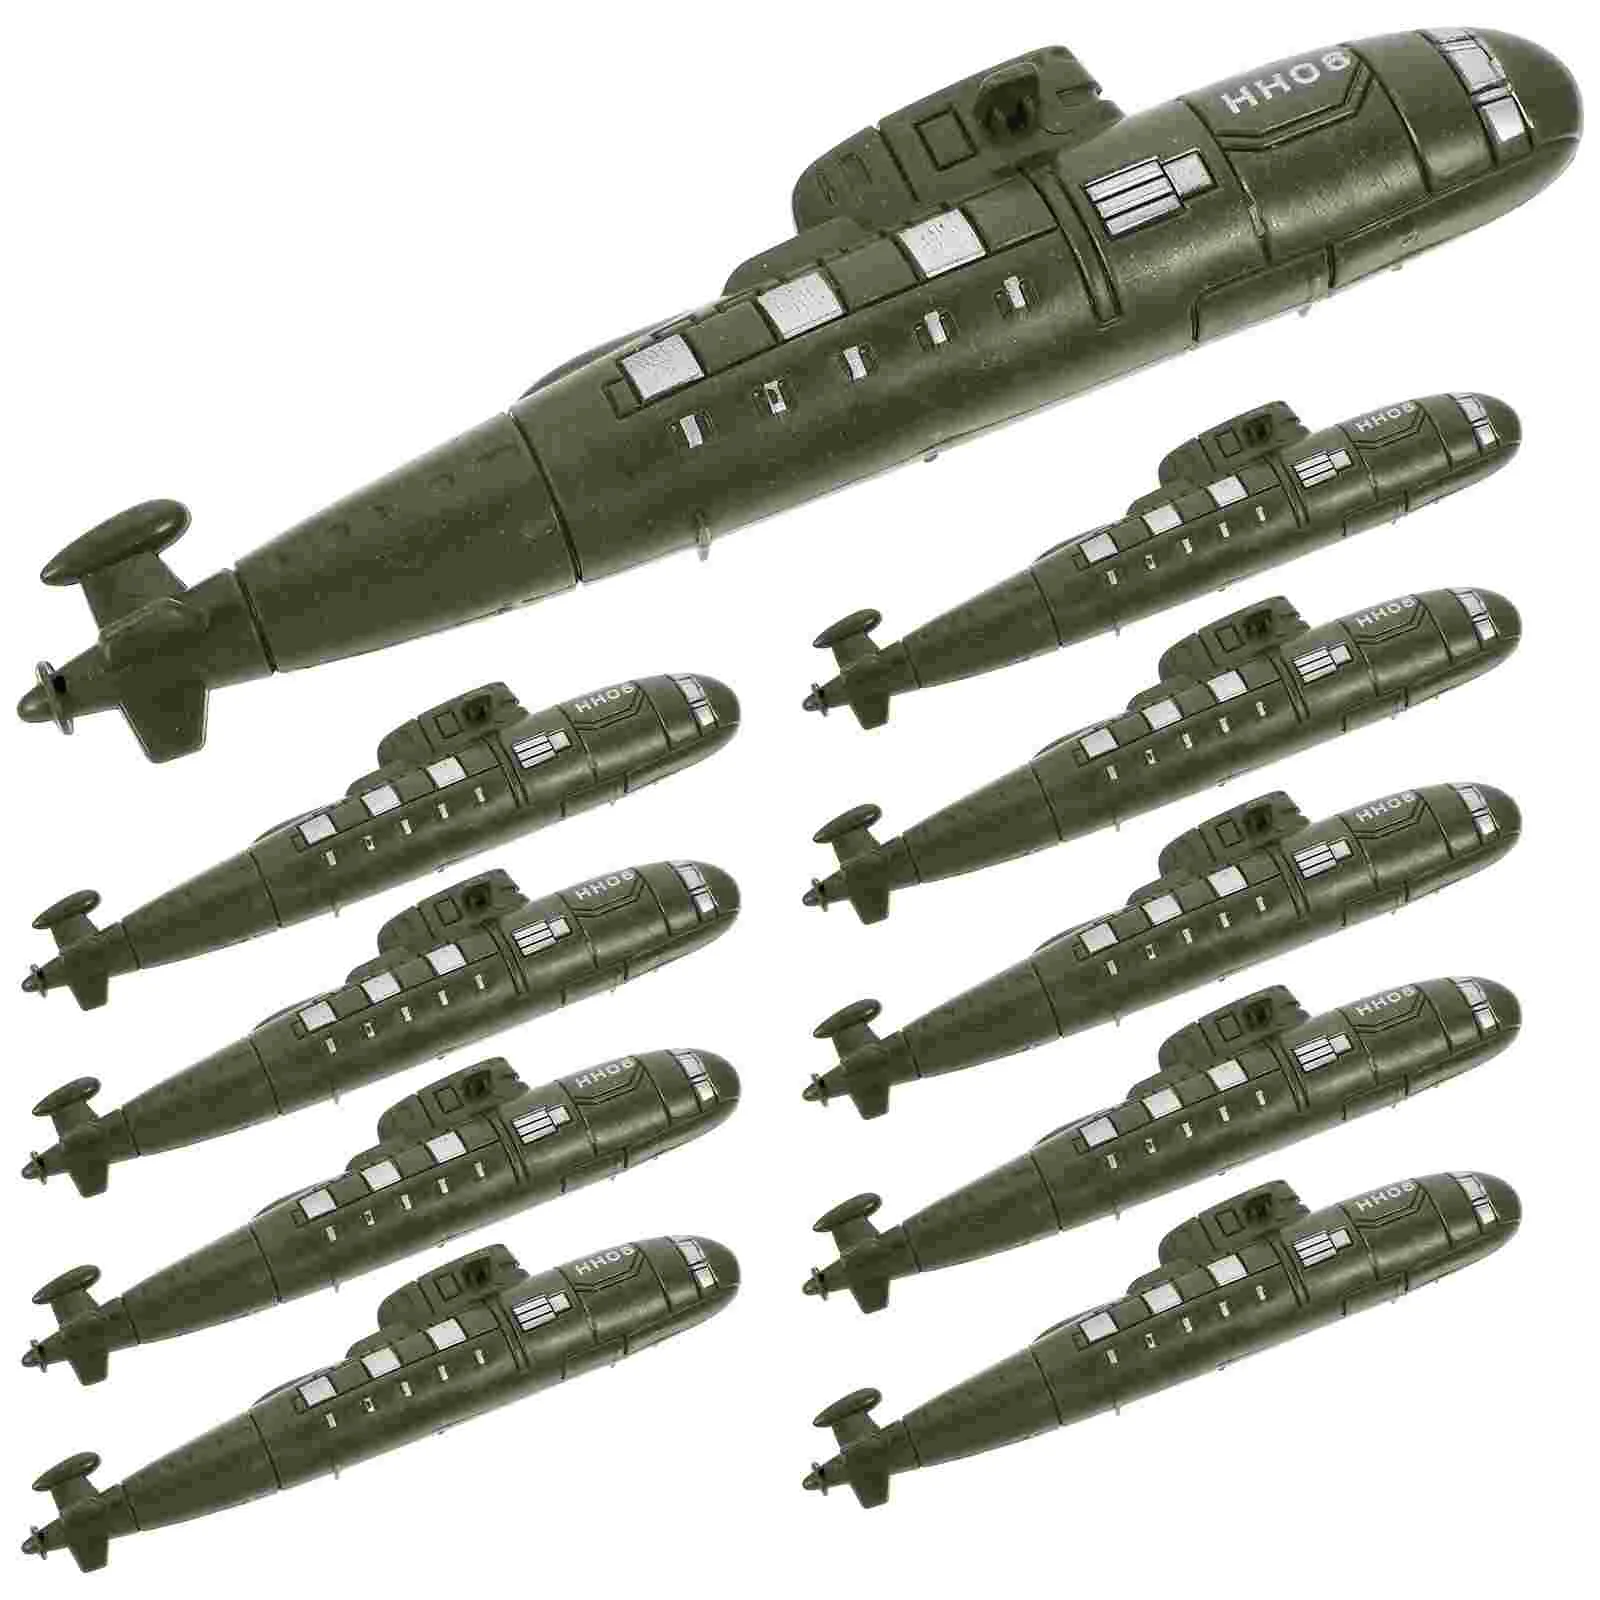 

Assorted Battleships Accessories Toy Simulated Submarine Micromachine Toys Small Submarines Adornment